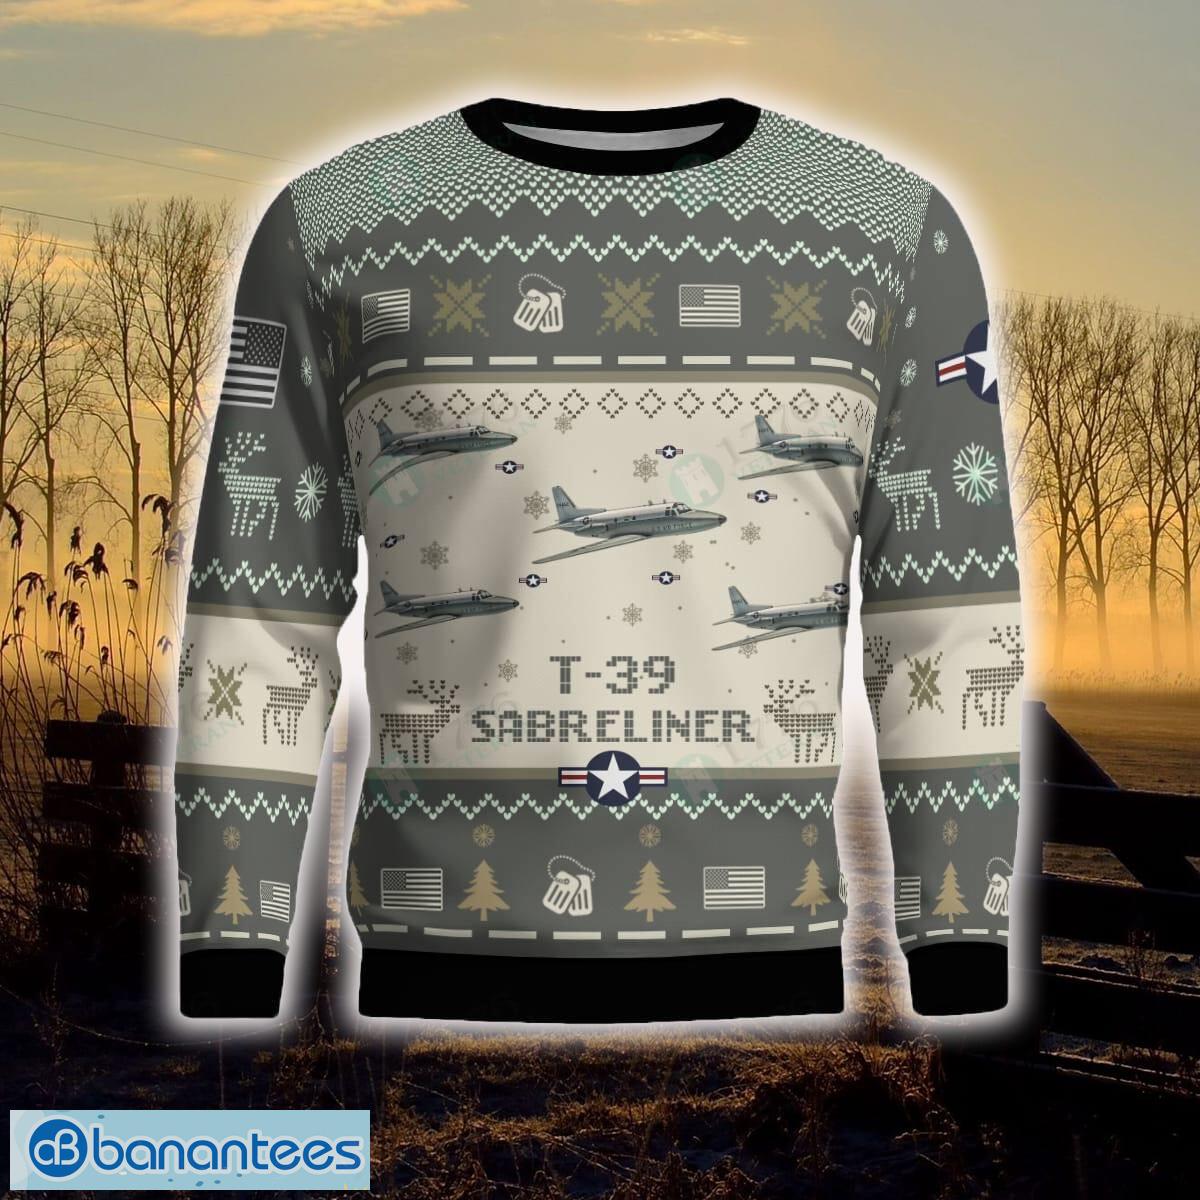 T-39 Sabreliner T39 Aircraft Ugly Christmas Sweater Veterans Holidays For Men And Women - T-39 Sabreliner T39_Aircraft Ugly Sweater_2